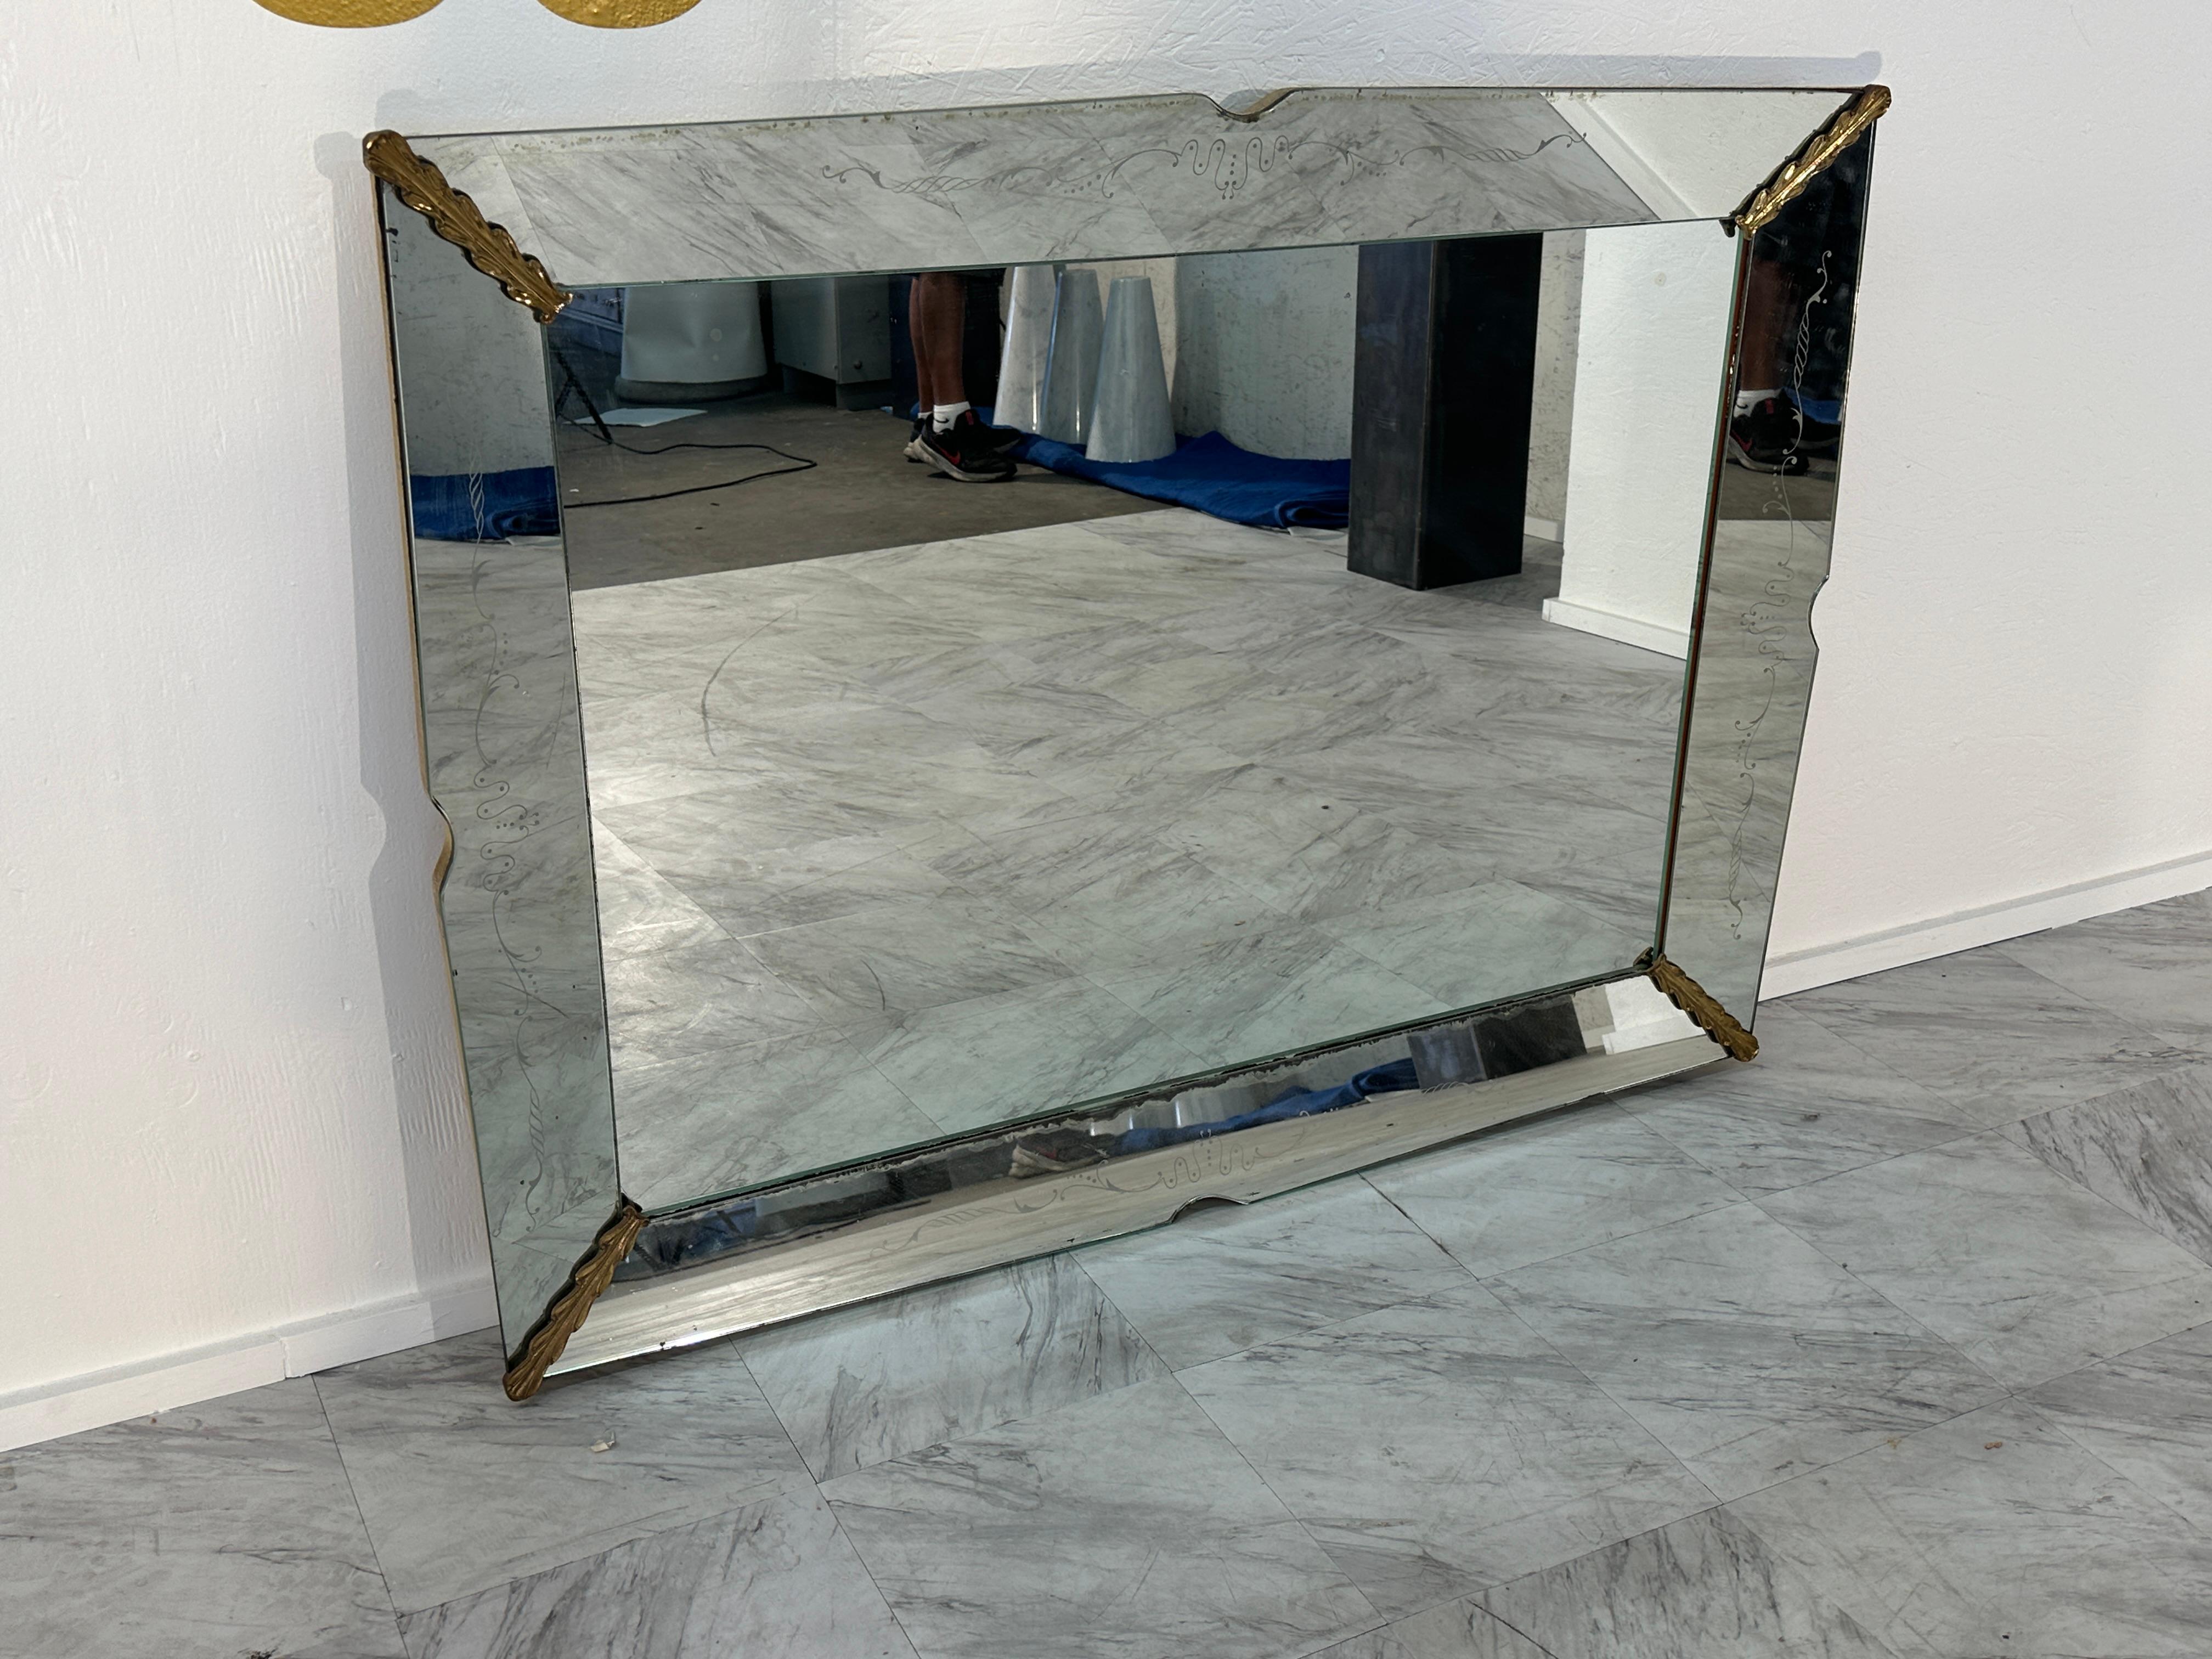 The Vintage Italian Rectangular Chrome Wall Mirror from the 1980s is a stylish and sleek addition to interior decor. Featuring a rectangular shape, this mirror is framed with chrome, adding a touch of modern elegance to its design. The chrome frame